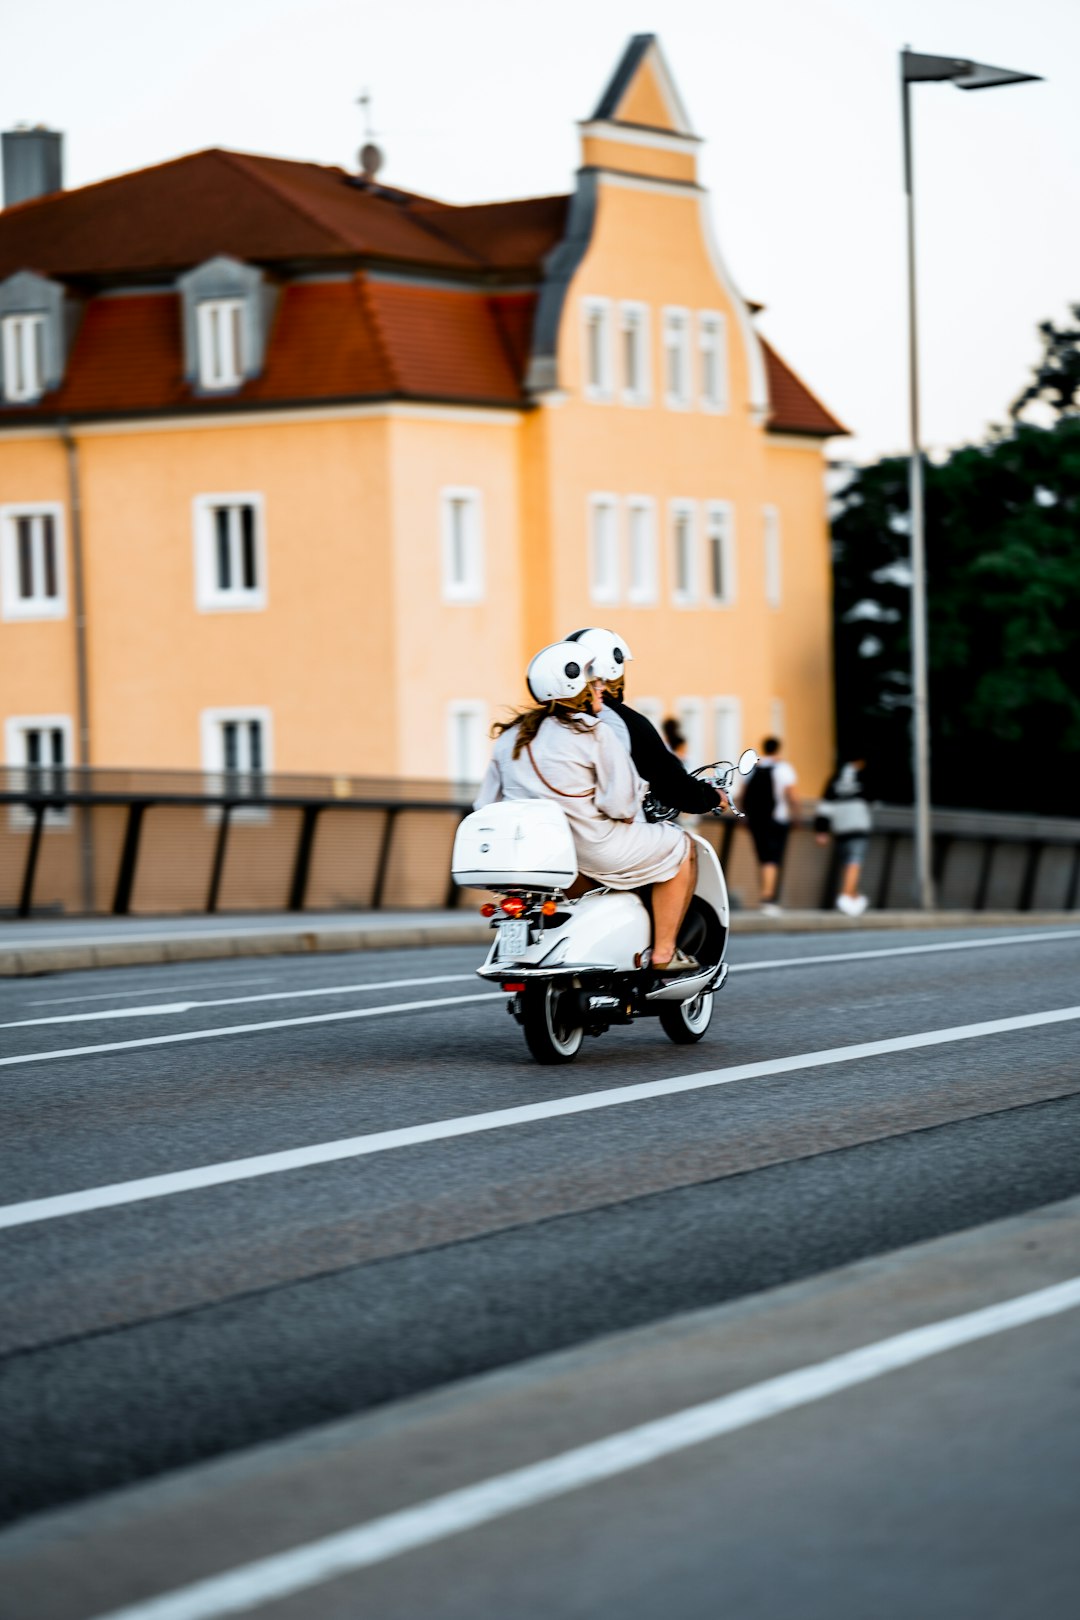 man in white helmet riding on motorcycle on road during daytime